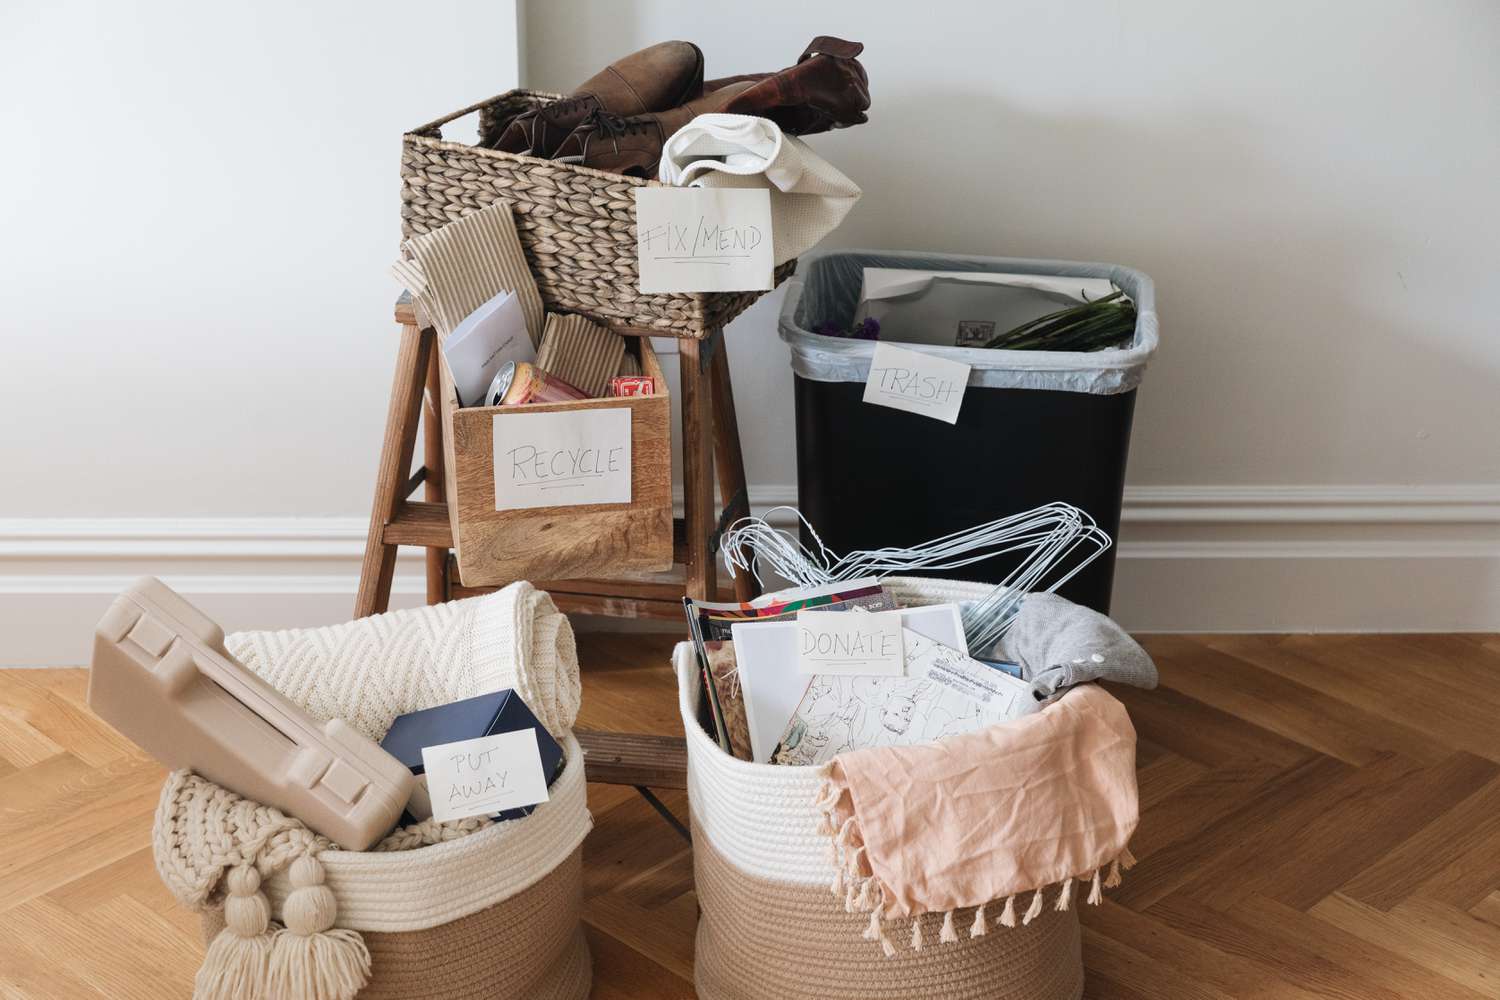 How Do You Declutter Your Home When You Feel Overwhelmed?